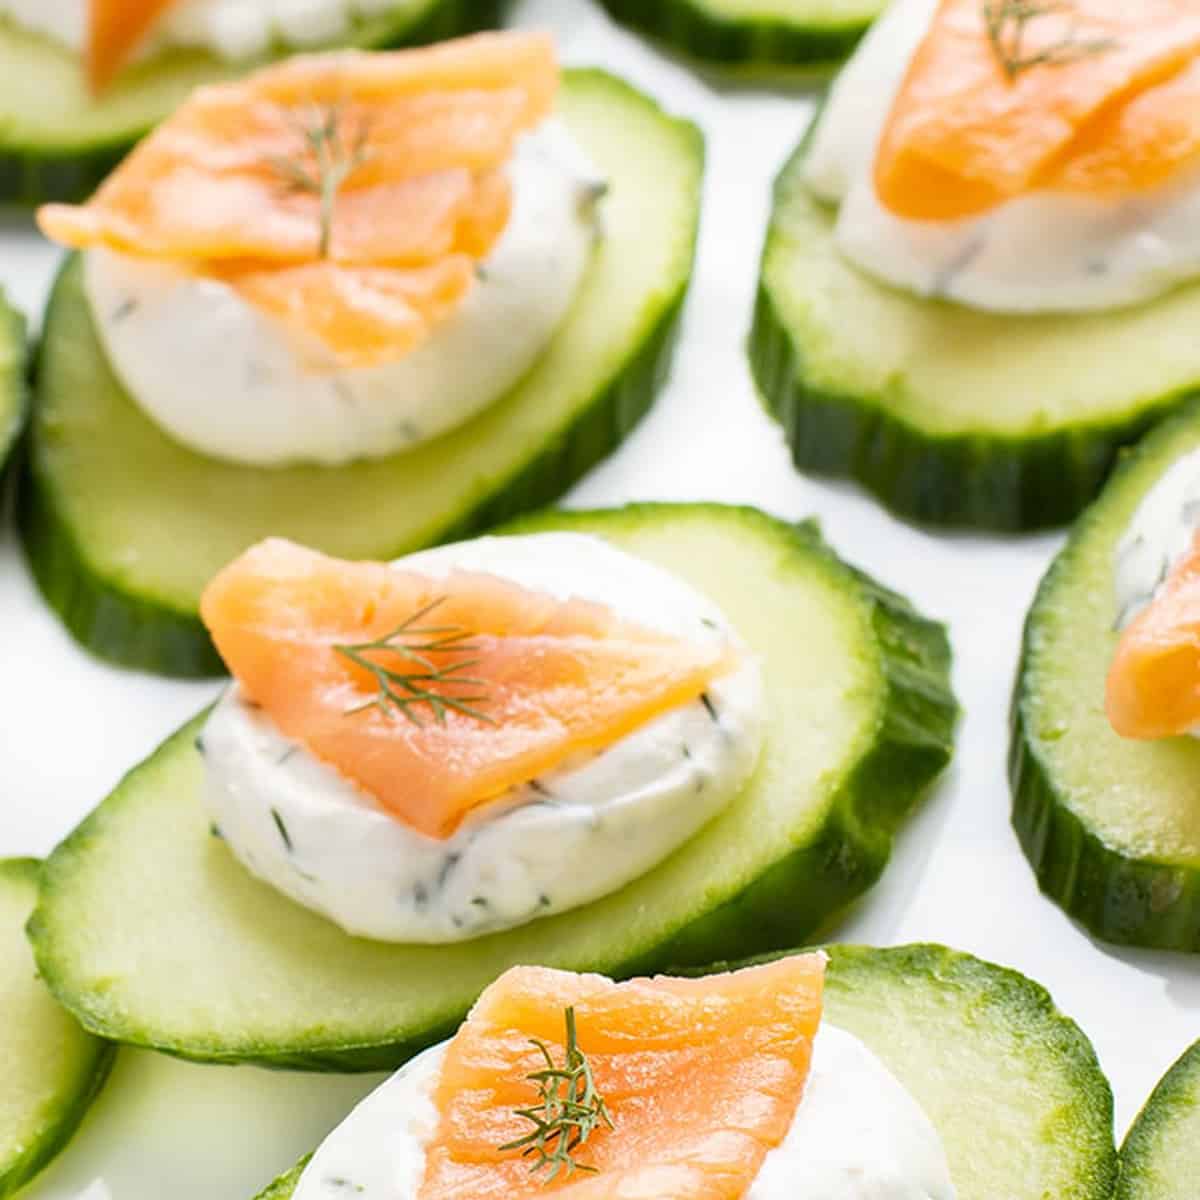 Some cucumbers with cream cheese on top.